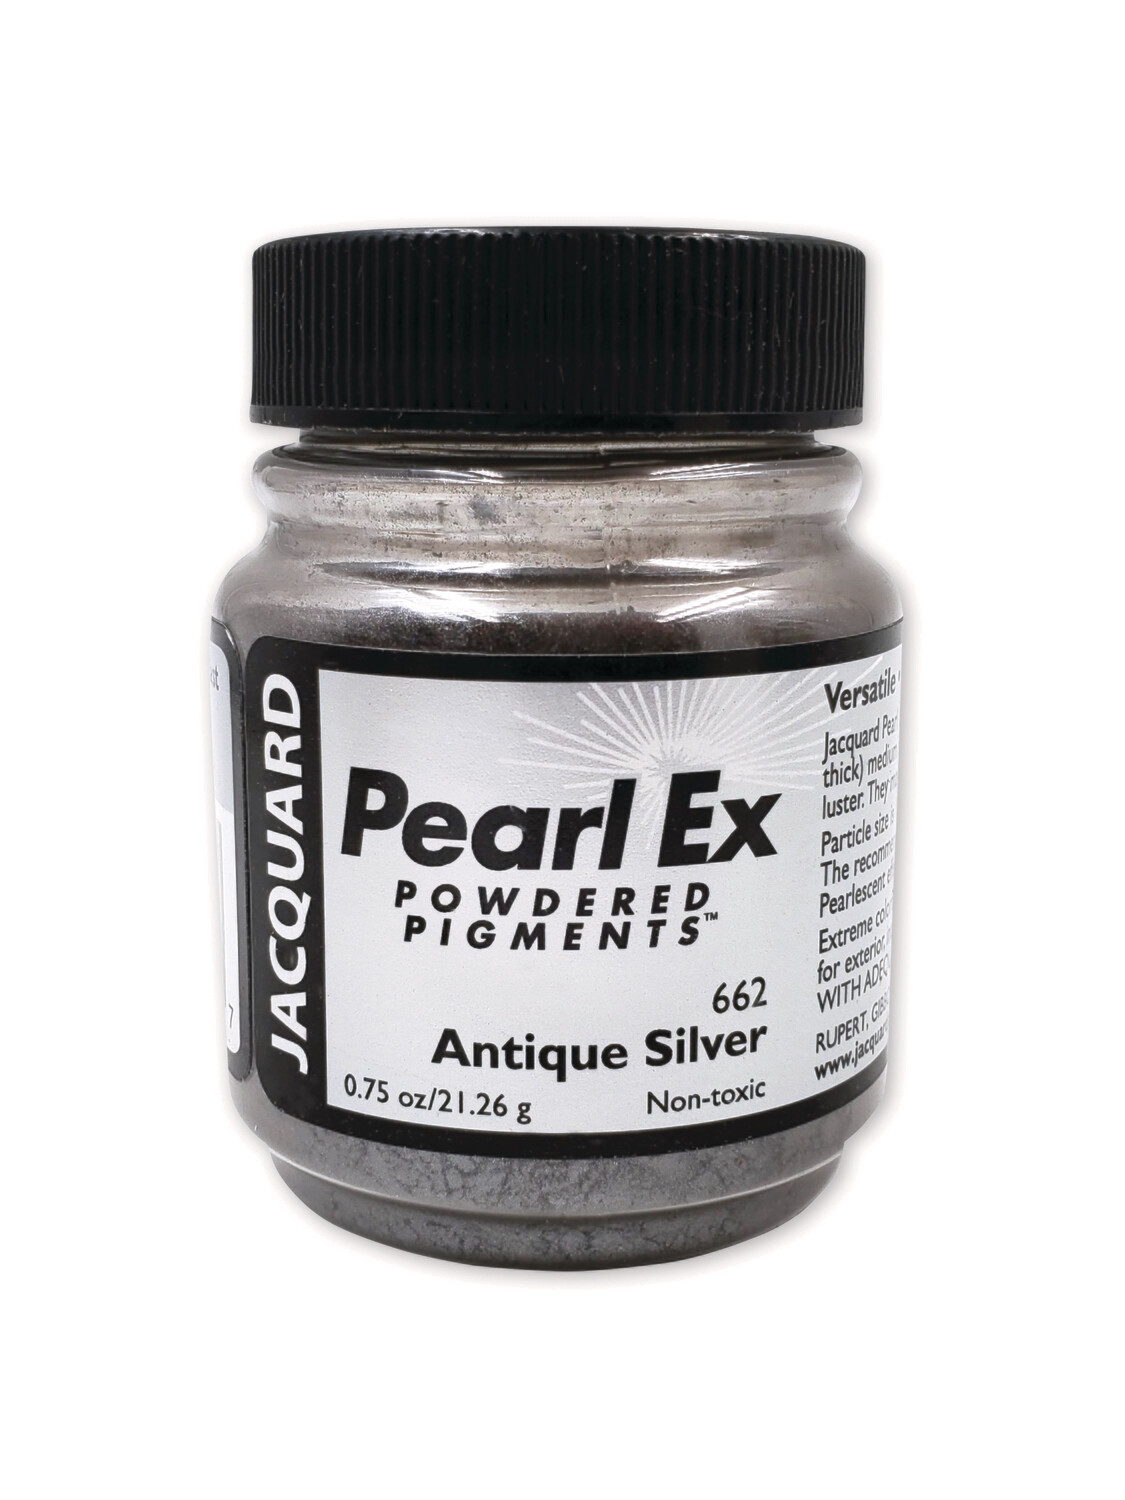 Pearl Ex Powdered Pigments- Antique Silver